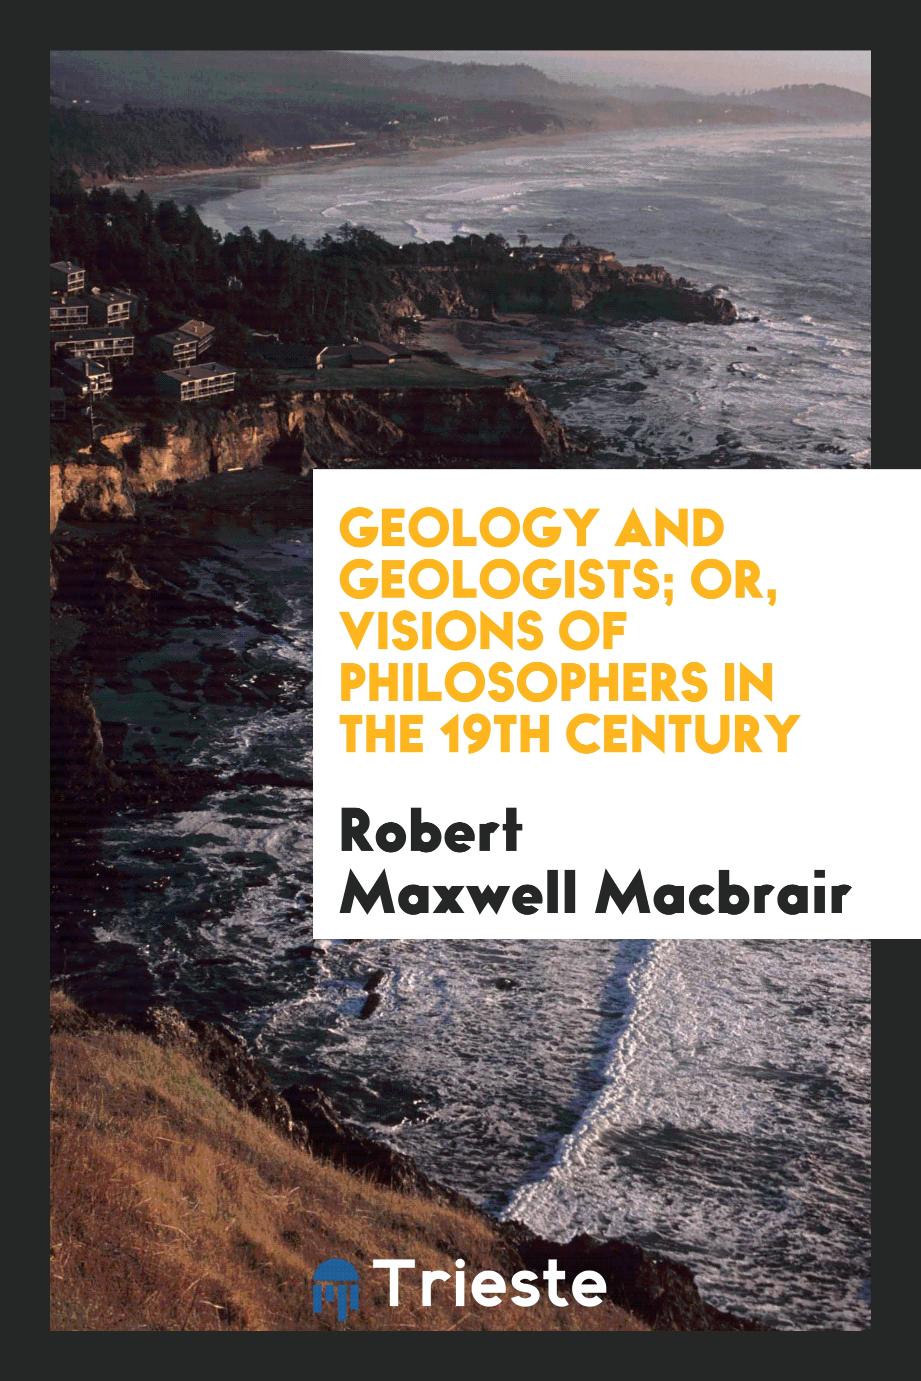 Geology and Geologists; Or, Visions of Philosophers in the 19th Century